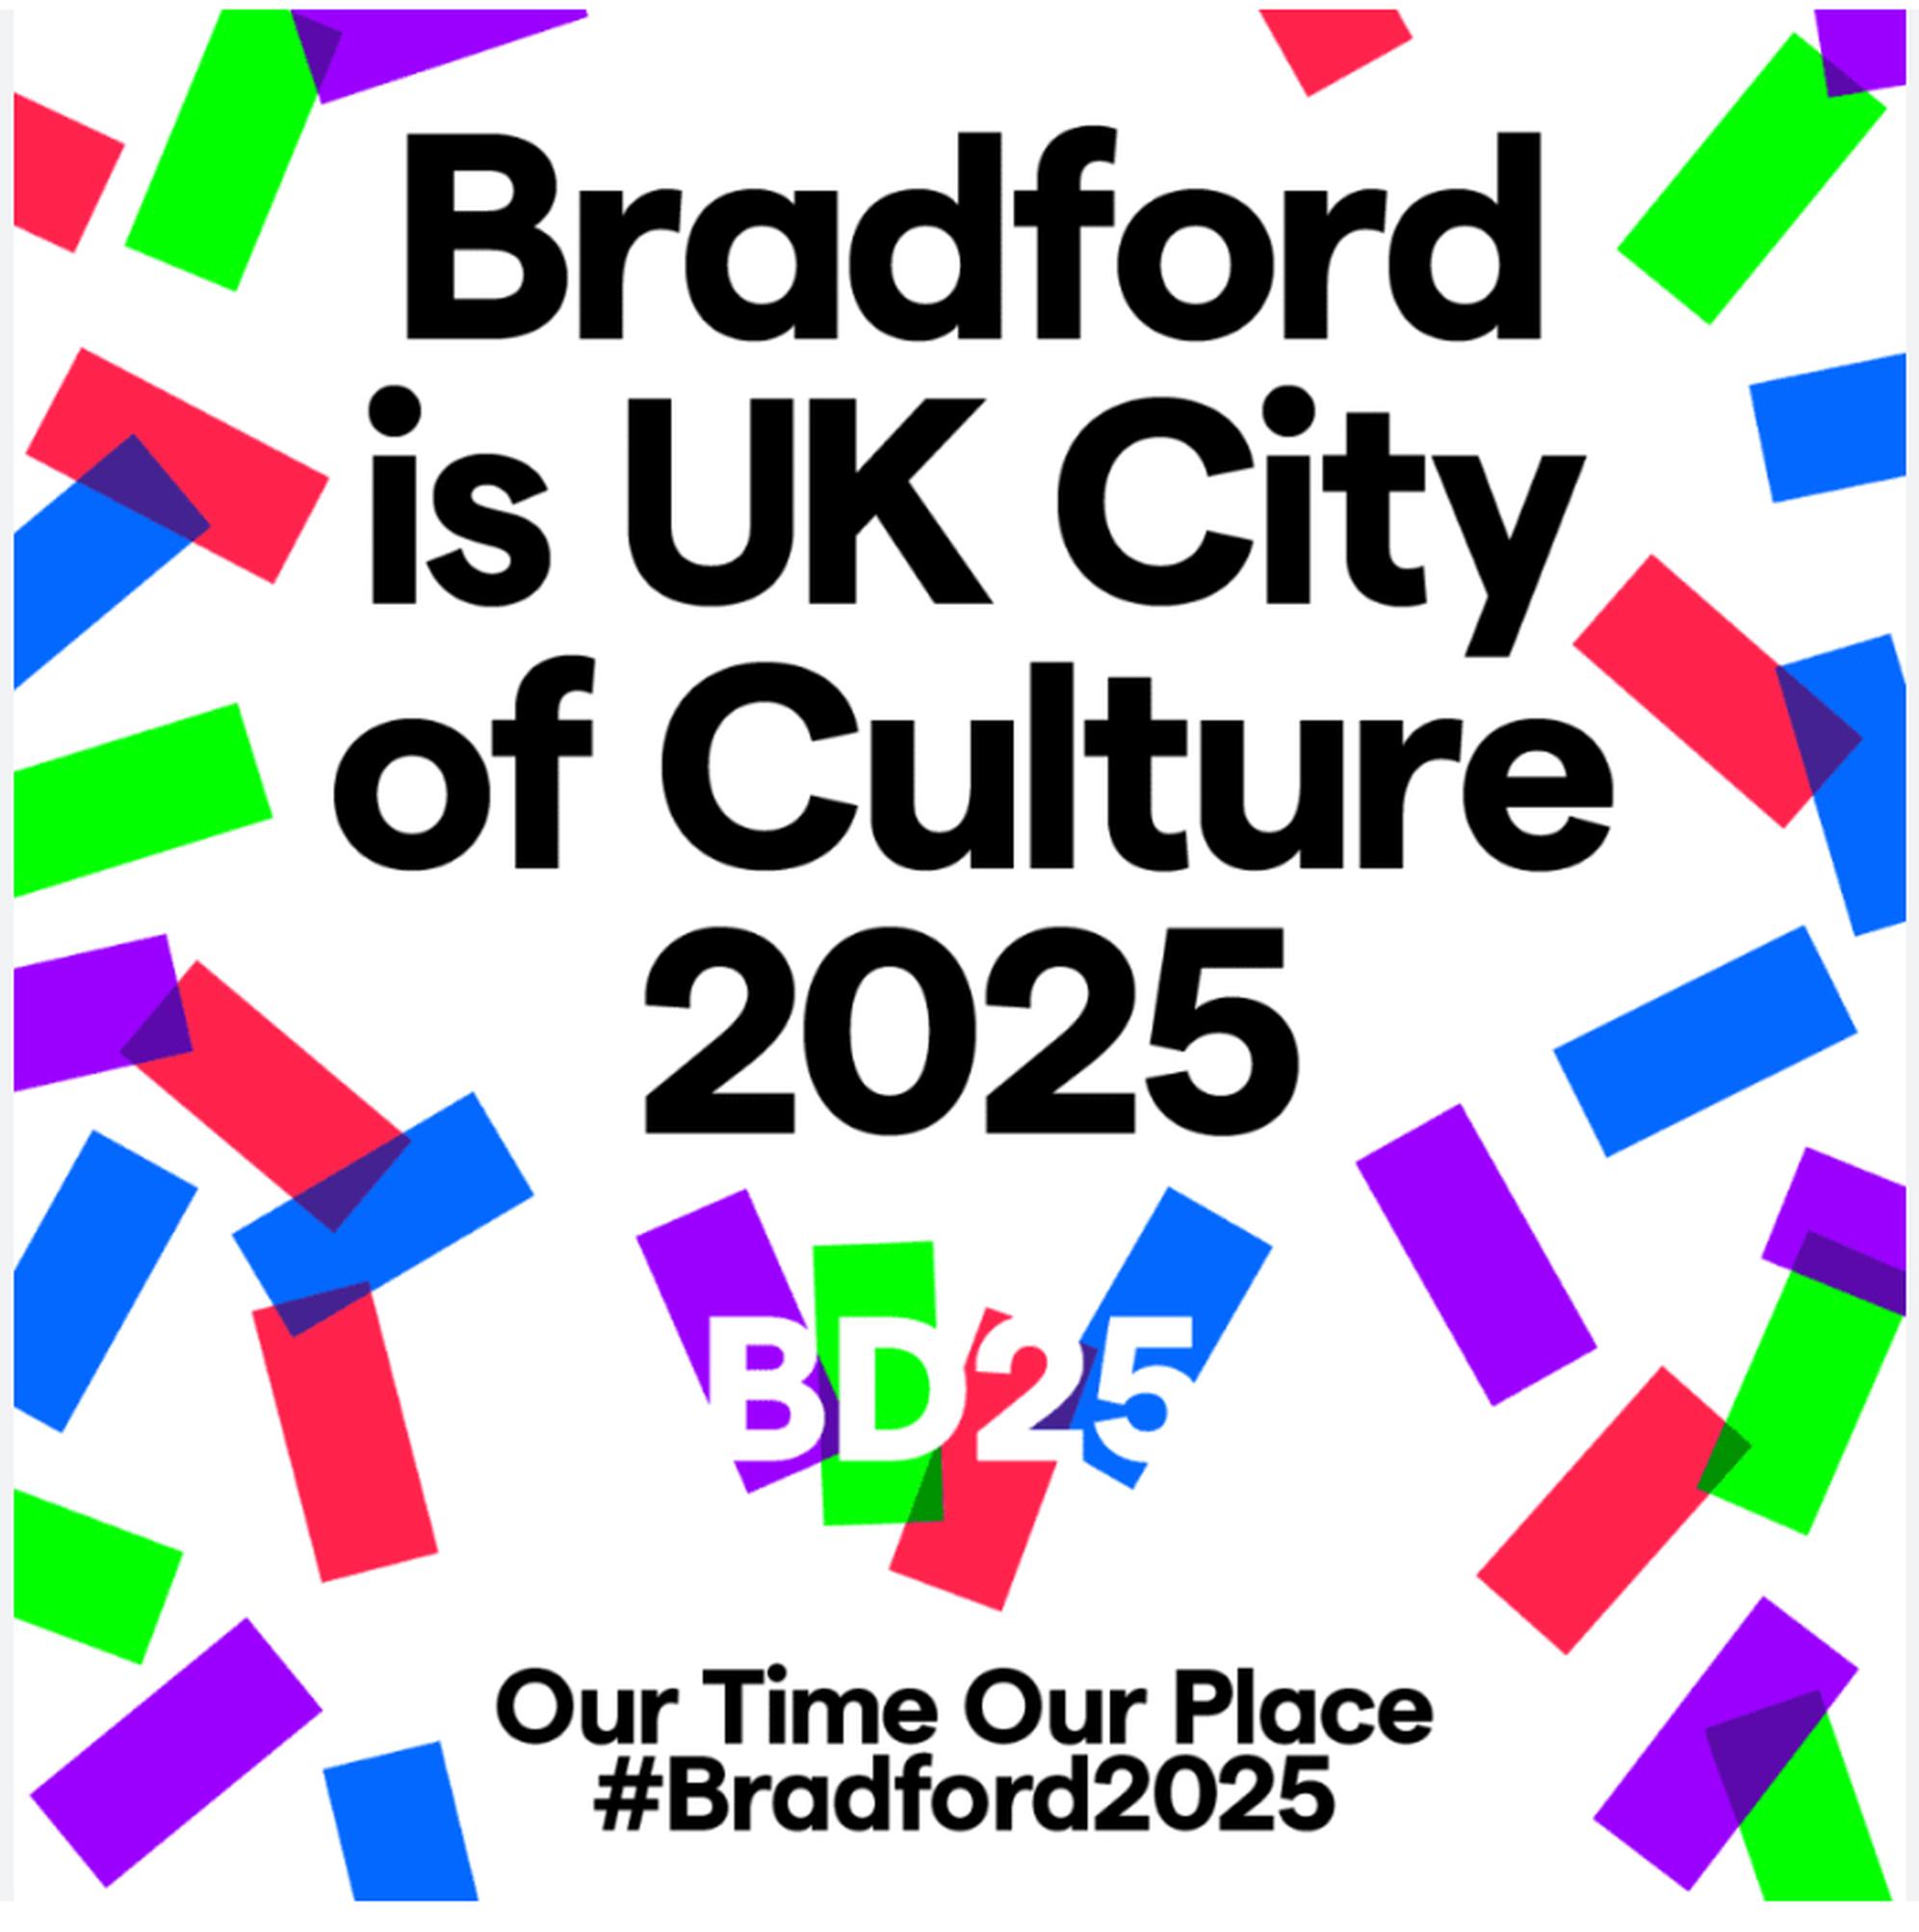 New platform at Forster Square Station set to be ready int time for Bradford becoming the UK’s City of Culture in 2025